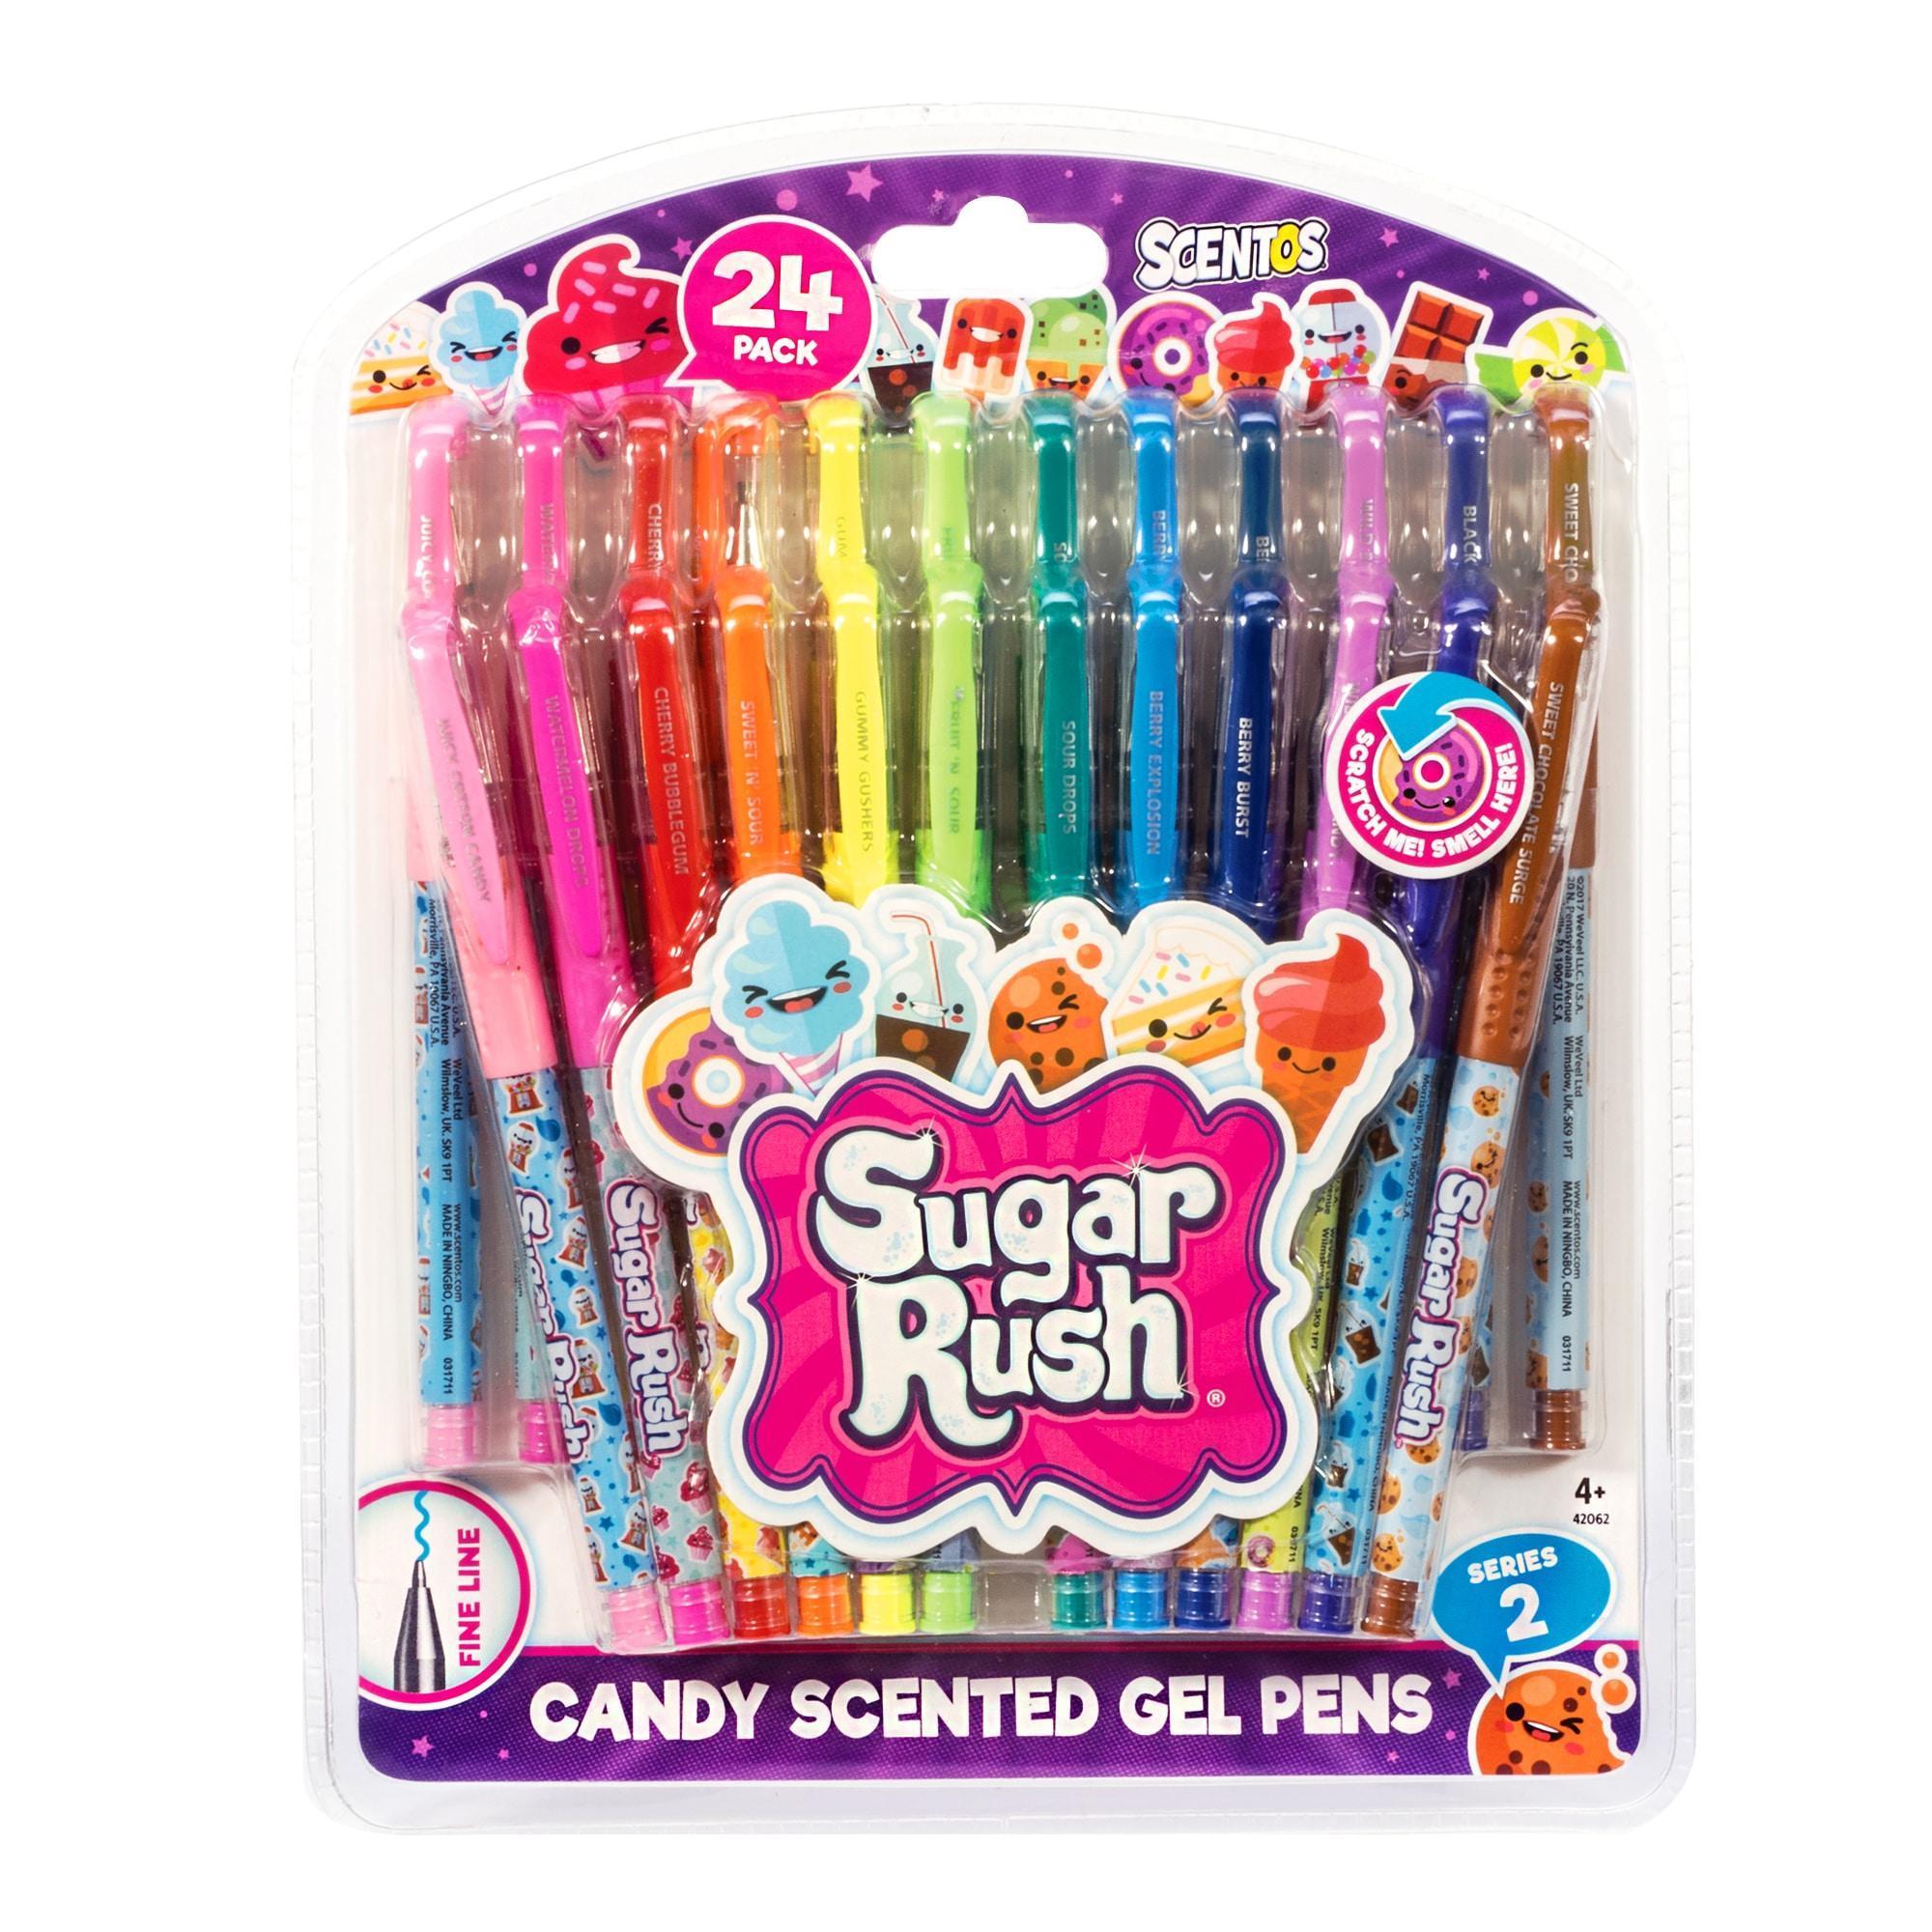 Little_M_olshoppe on Instagram: ON HAND IN PH Scentos Sugar Rush Scented  Gel Pens Php 750 2 sets available